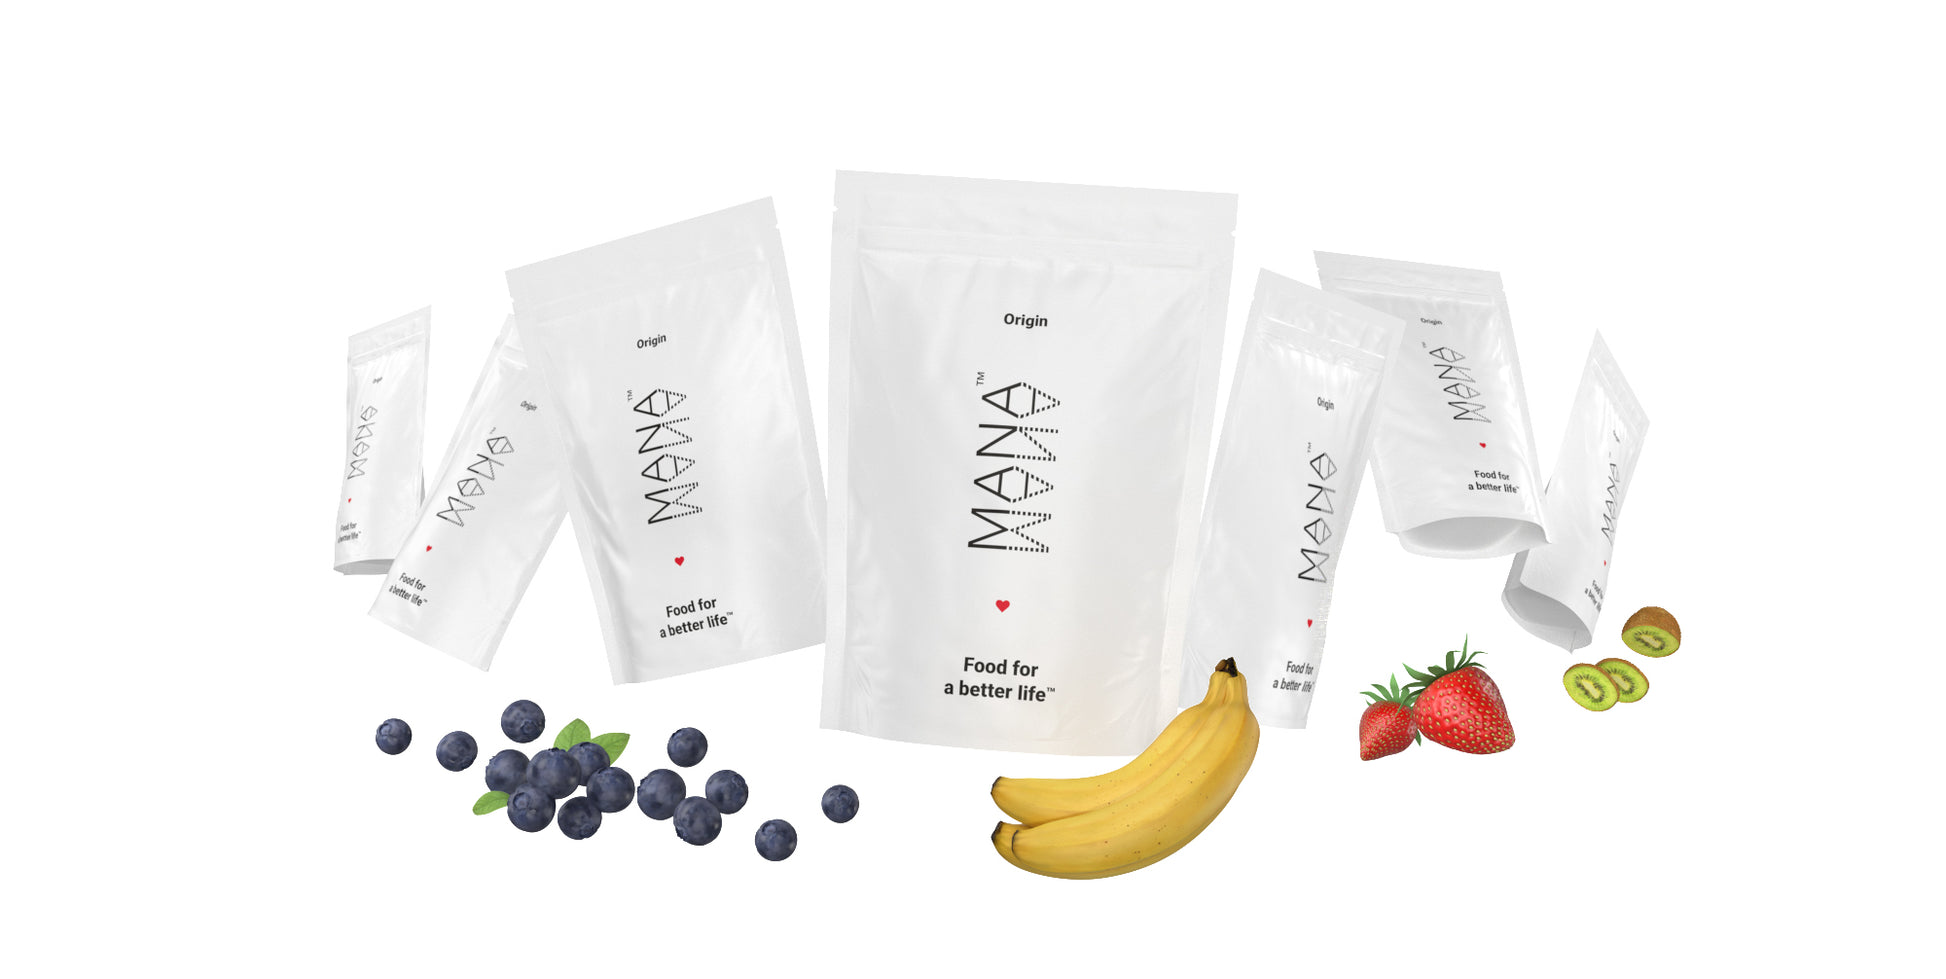 Mana: Europe's First Complete-Nutrition Food